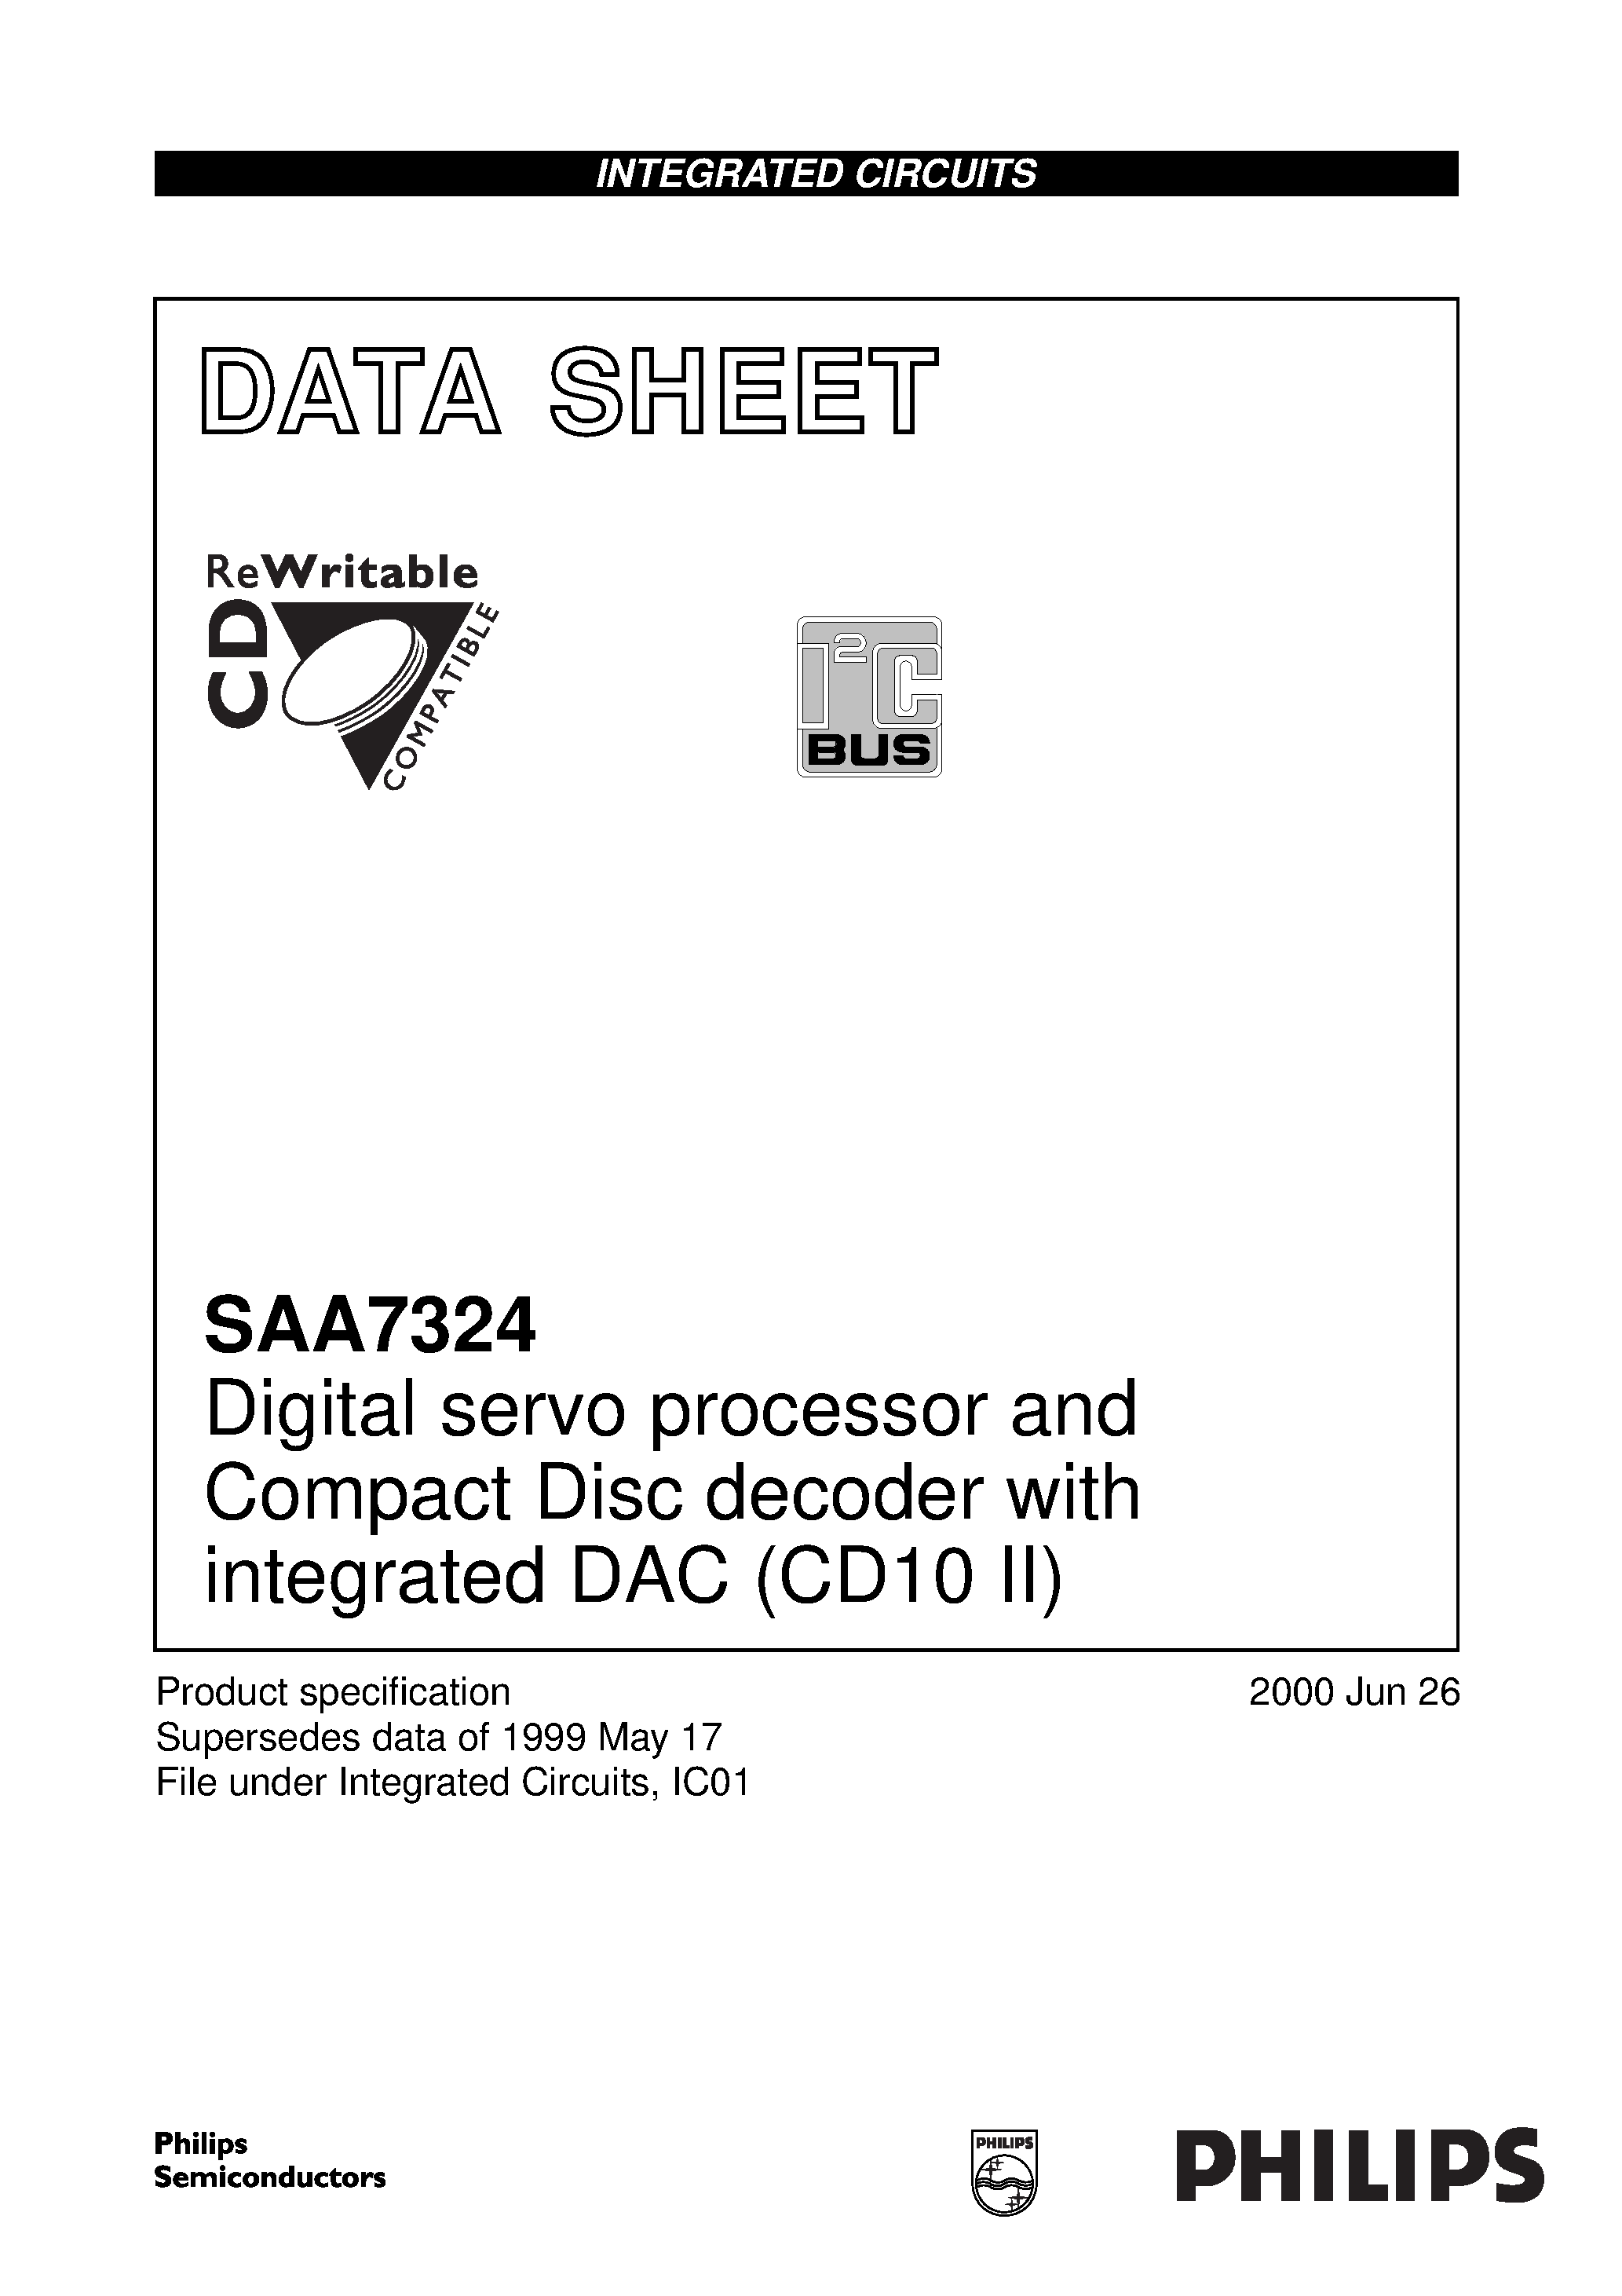 Datasheet SAA7324H - Digital servo processor and Compact Disc decoder with integrated DAC CD10 II page 1